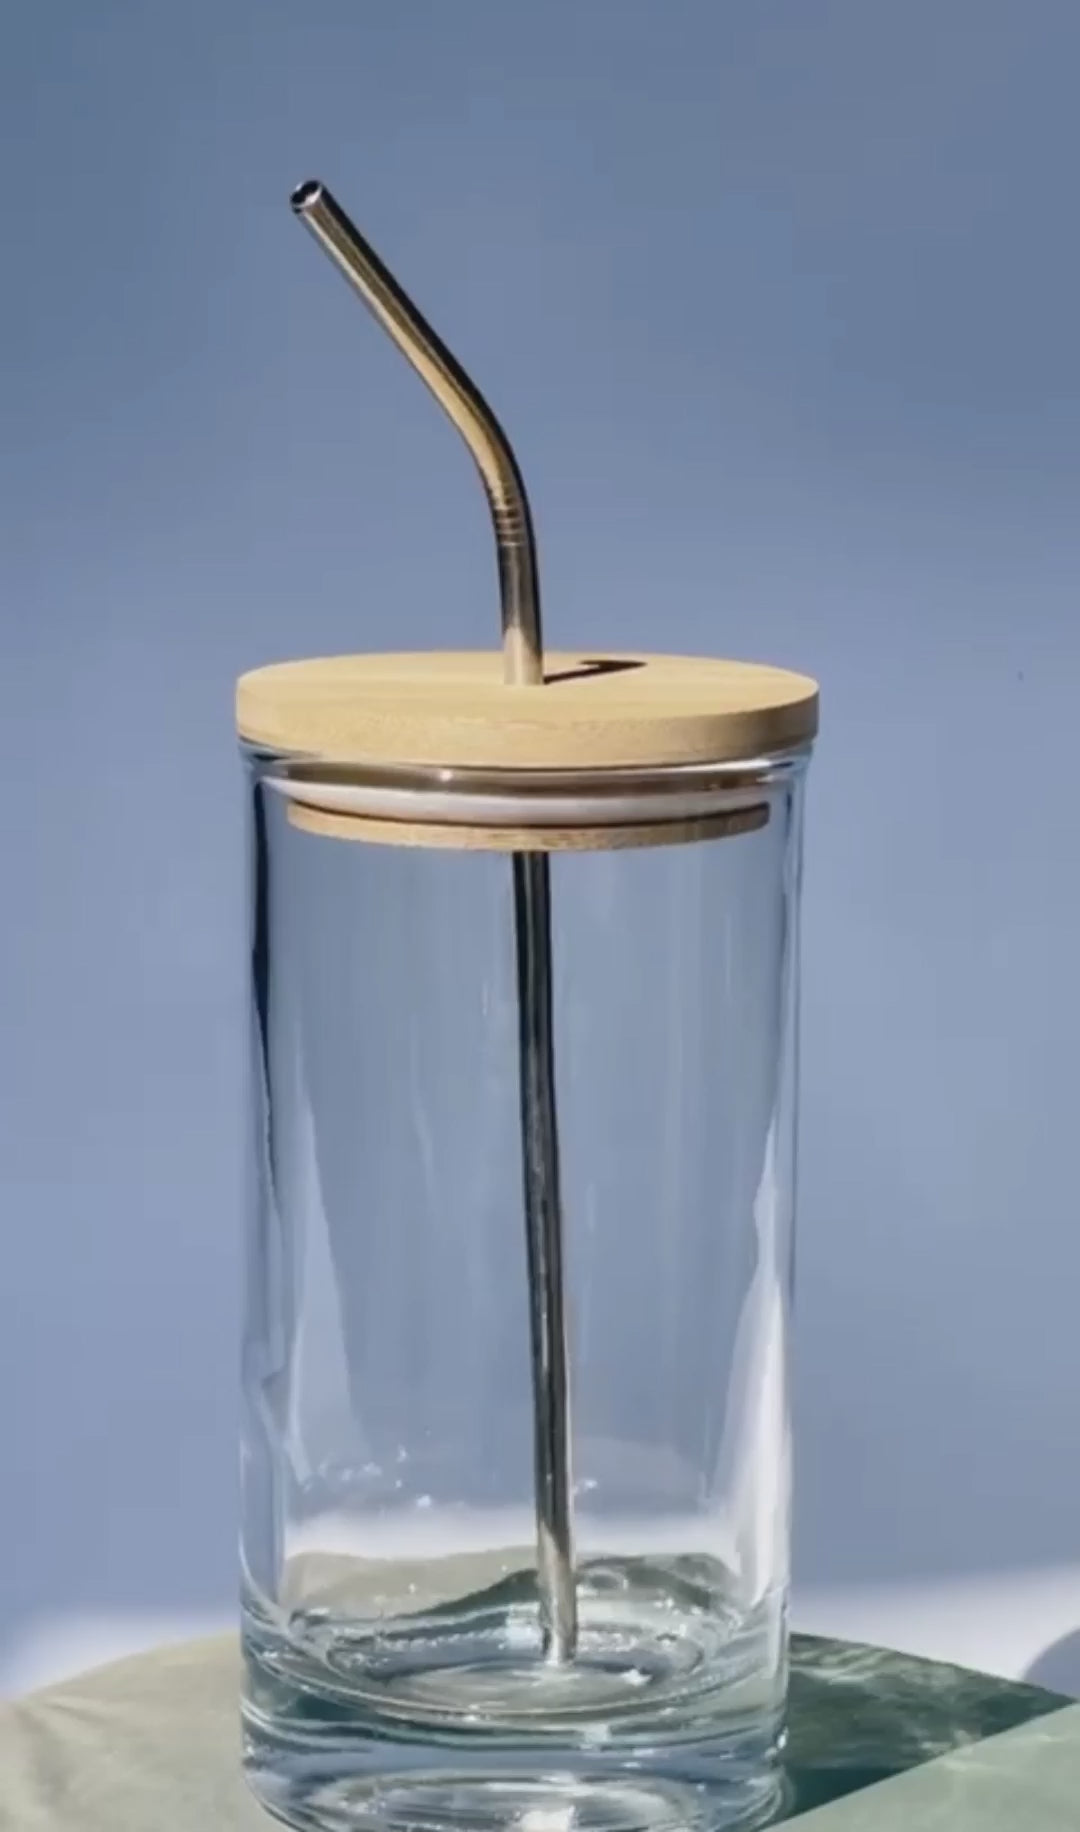 16oz Sippy Cup w/ Stainless Steel Straw and Bamboo Lid